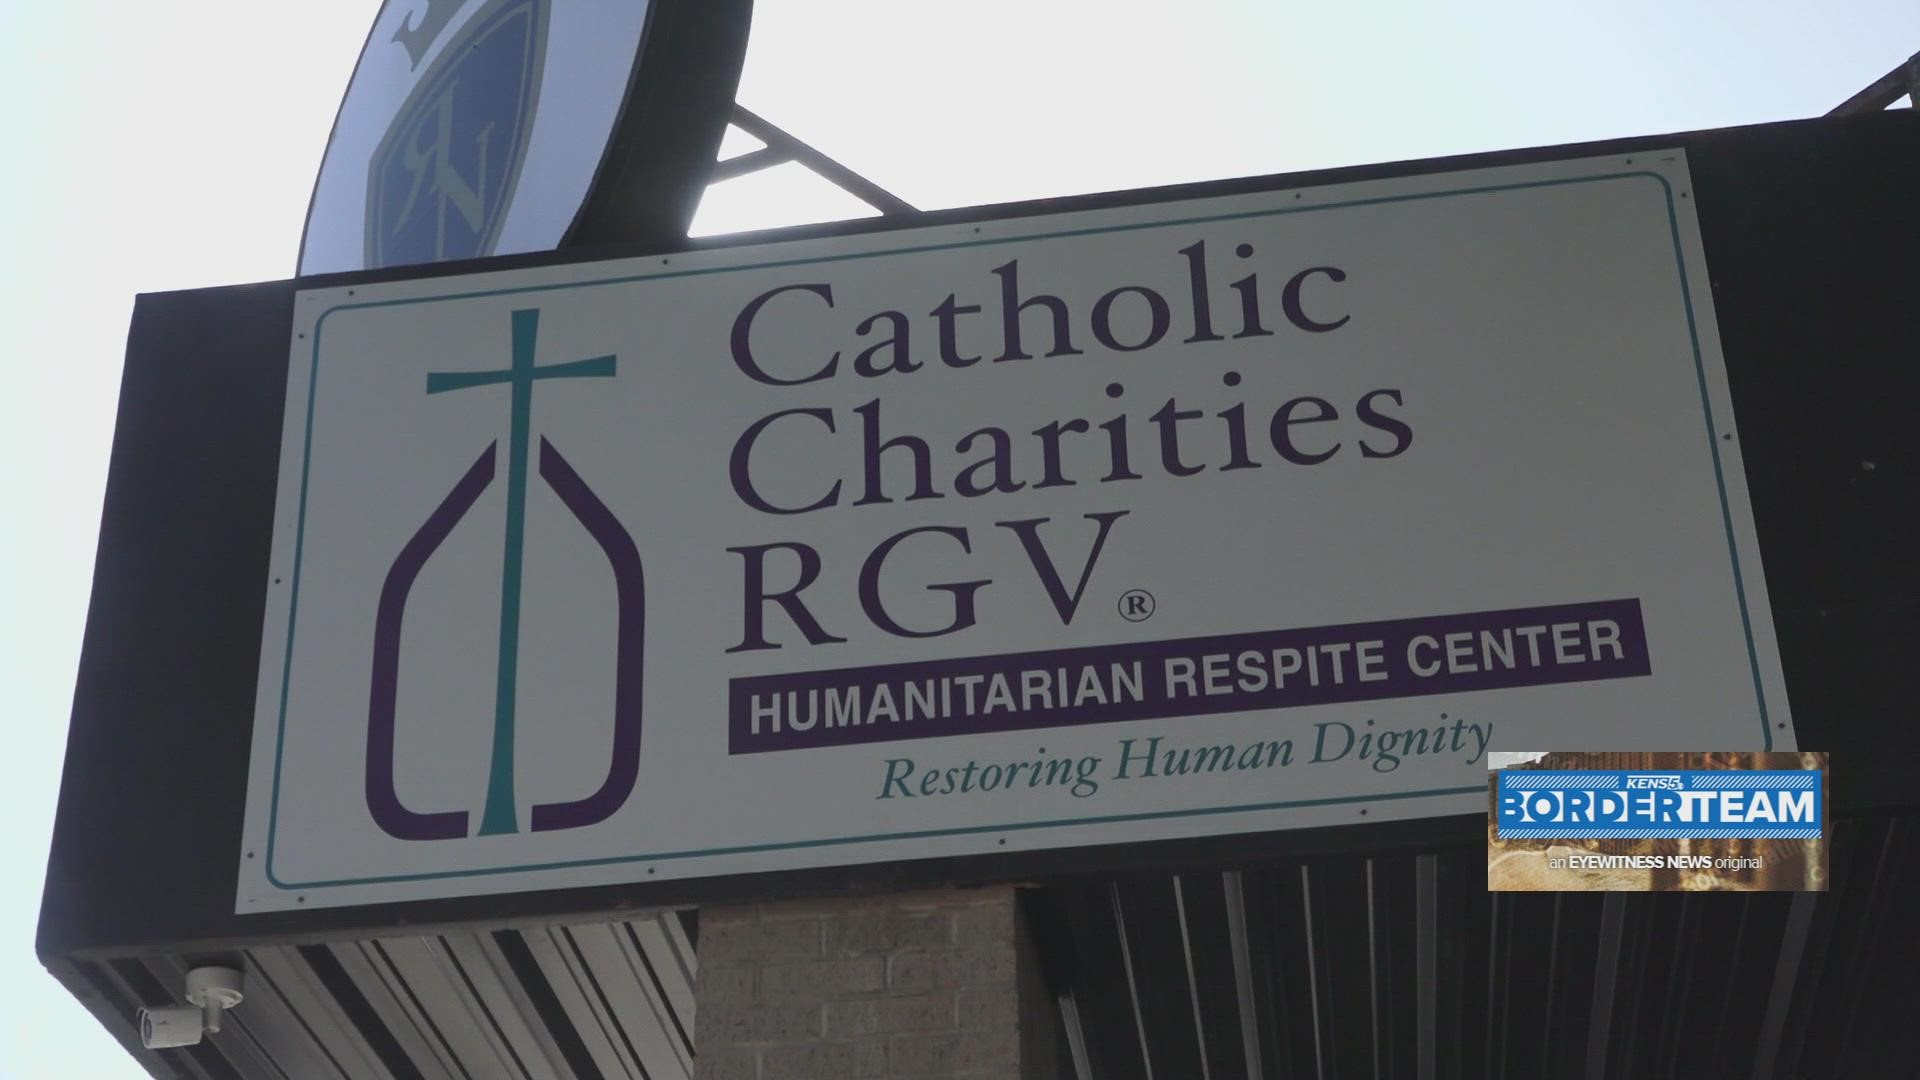 “We want to make sure we have the right space to be able to respond correctly,” said Sister Norma Pimentel, Executive Director of Catholic Charities in the RGV.